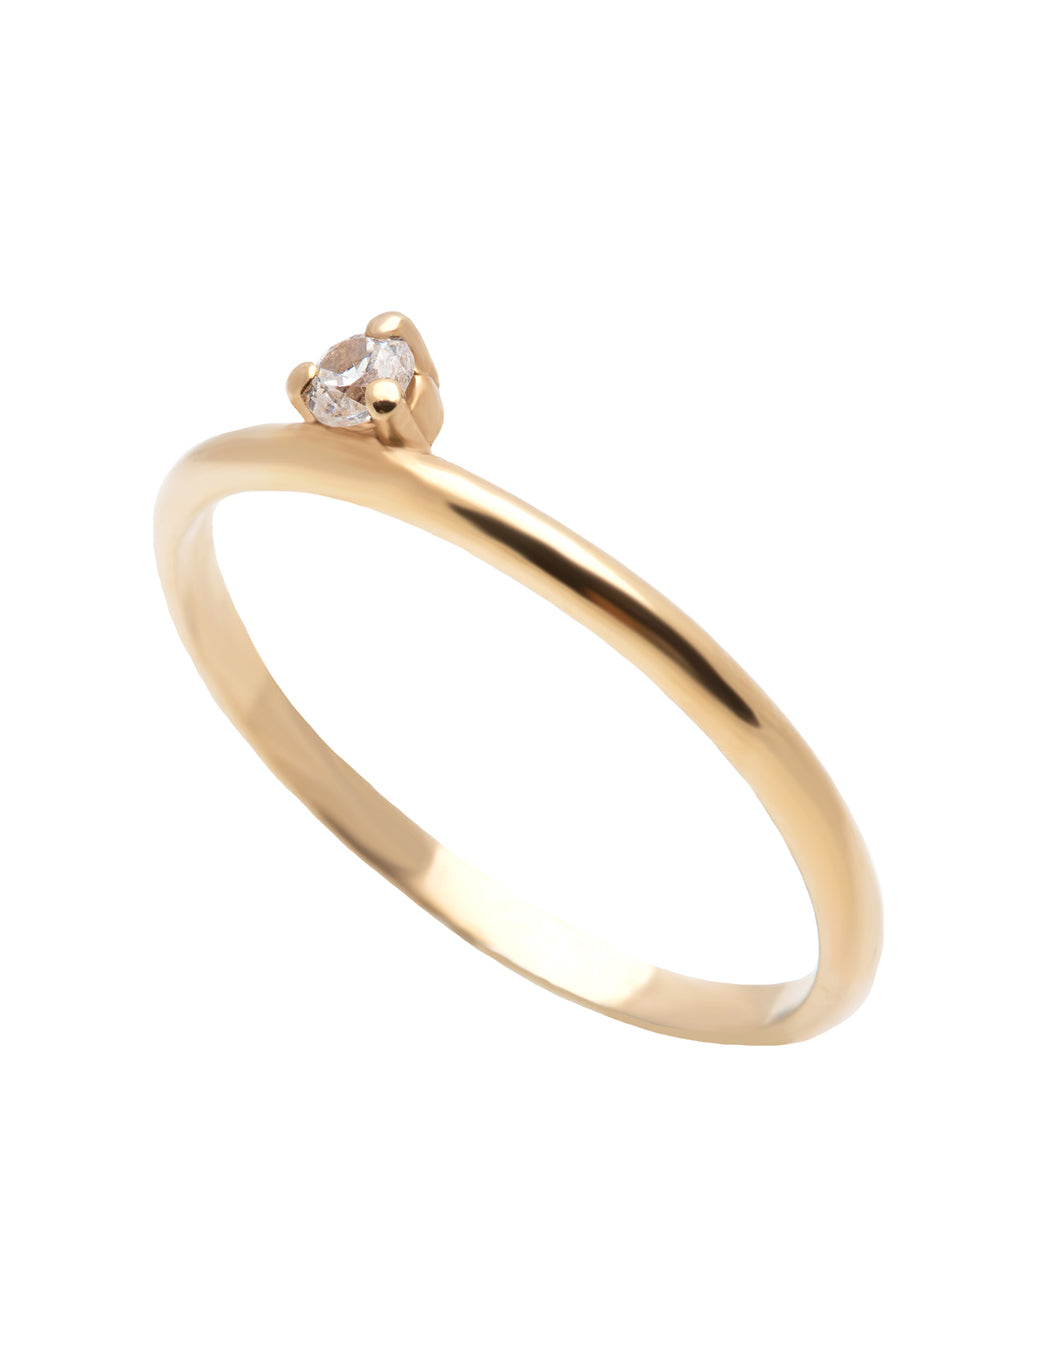 A dainty 14k yellow gold ring, set with one tiny, brilliant cut white diamond.